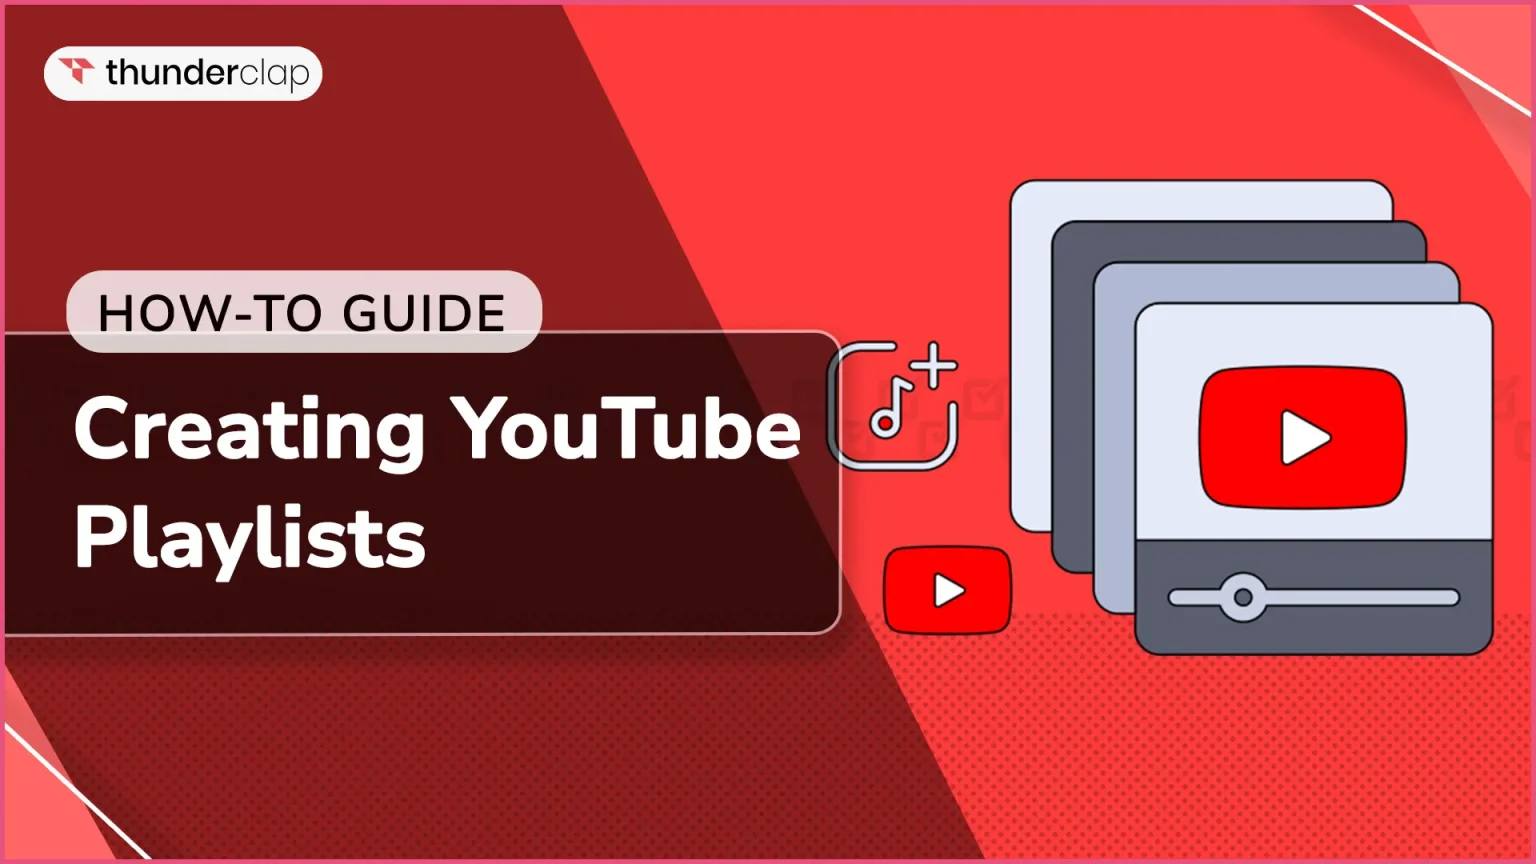 Creating YouTube Playlists: How-To Guide